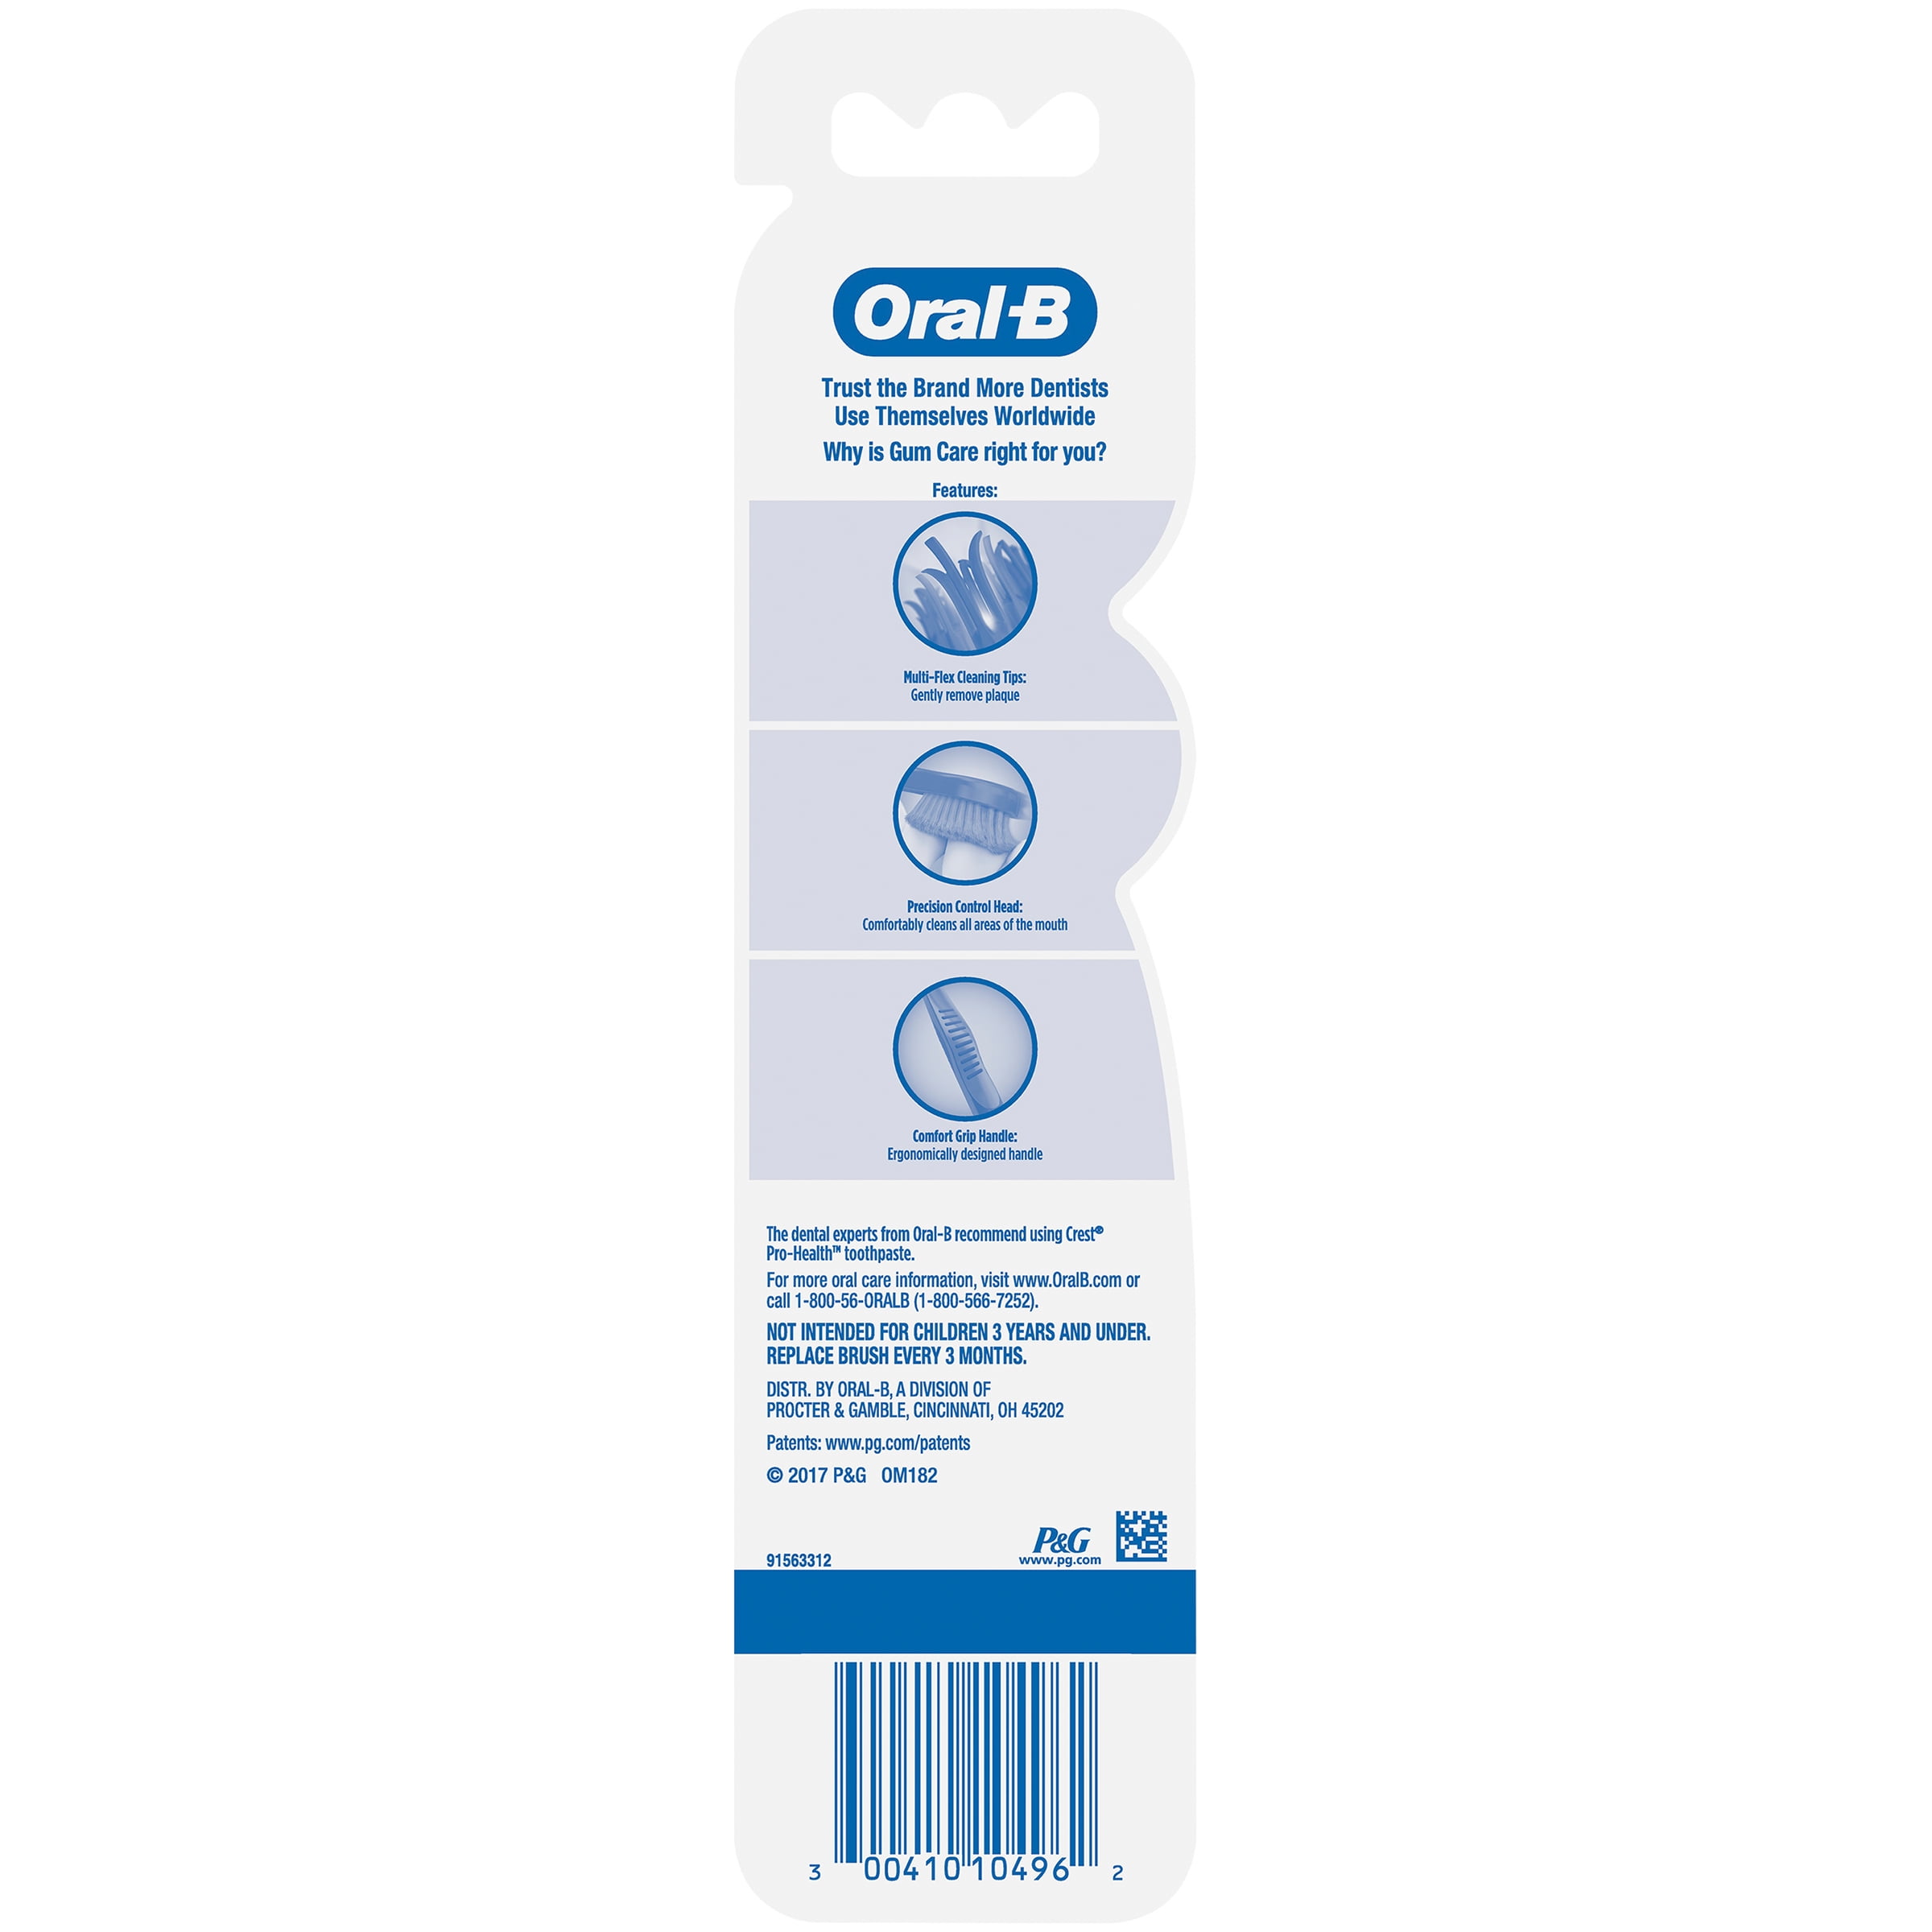 Oral-B Pro-Health Gum Care Manual Toothbrush, Ultra Soft Bristles, 2 count